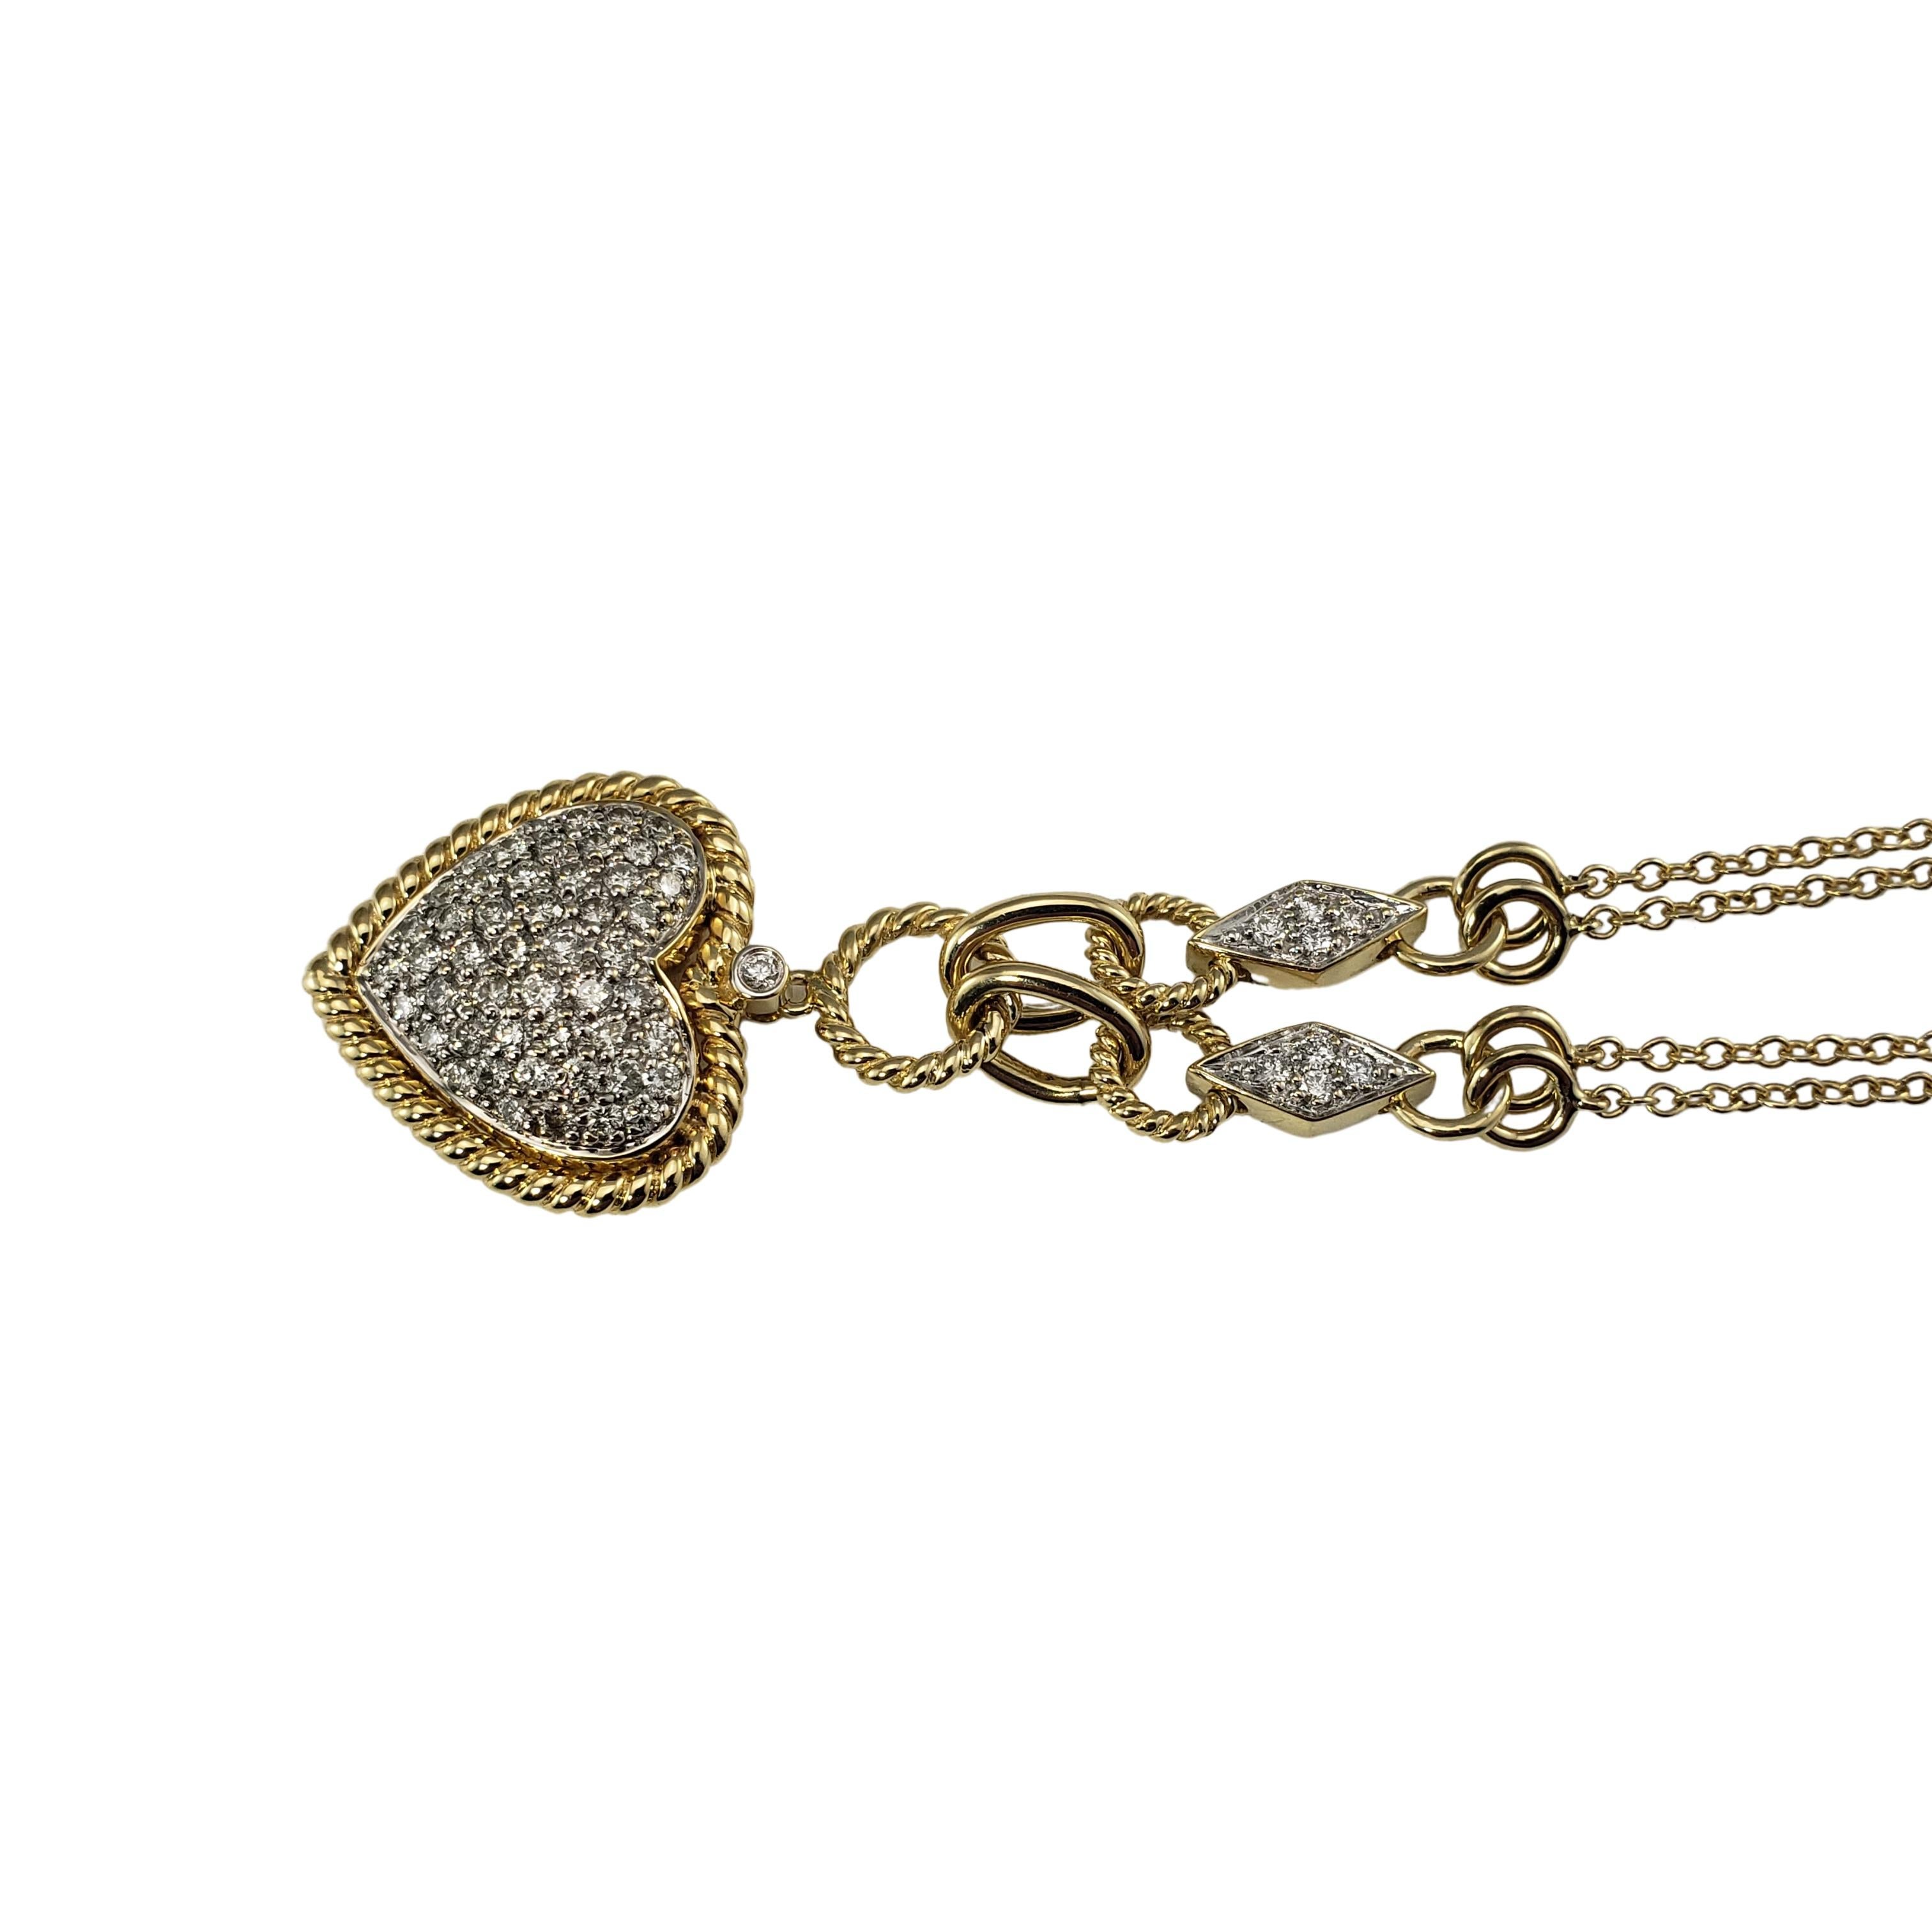 14 Karat Yellow Gold and Diamond Heart Pendant Necklace-

This stunning heart pendant features 50 round brilliant cut diamonds set in 14K yellow gold.  The double cable chain is accented with eight round brilliant cut diamonds.  

Approximate total